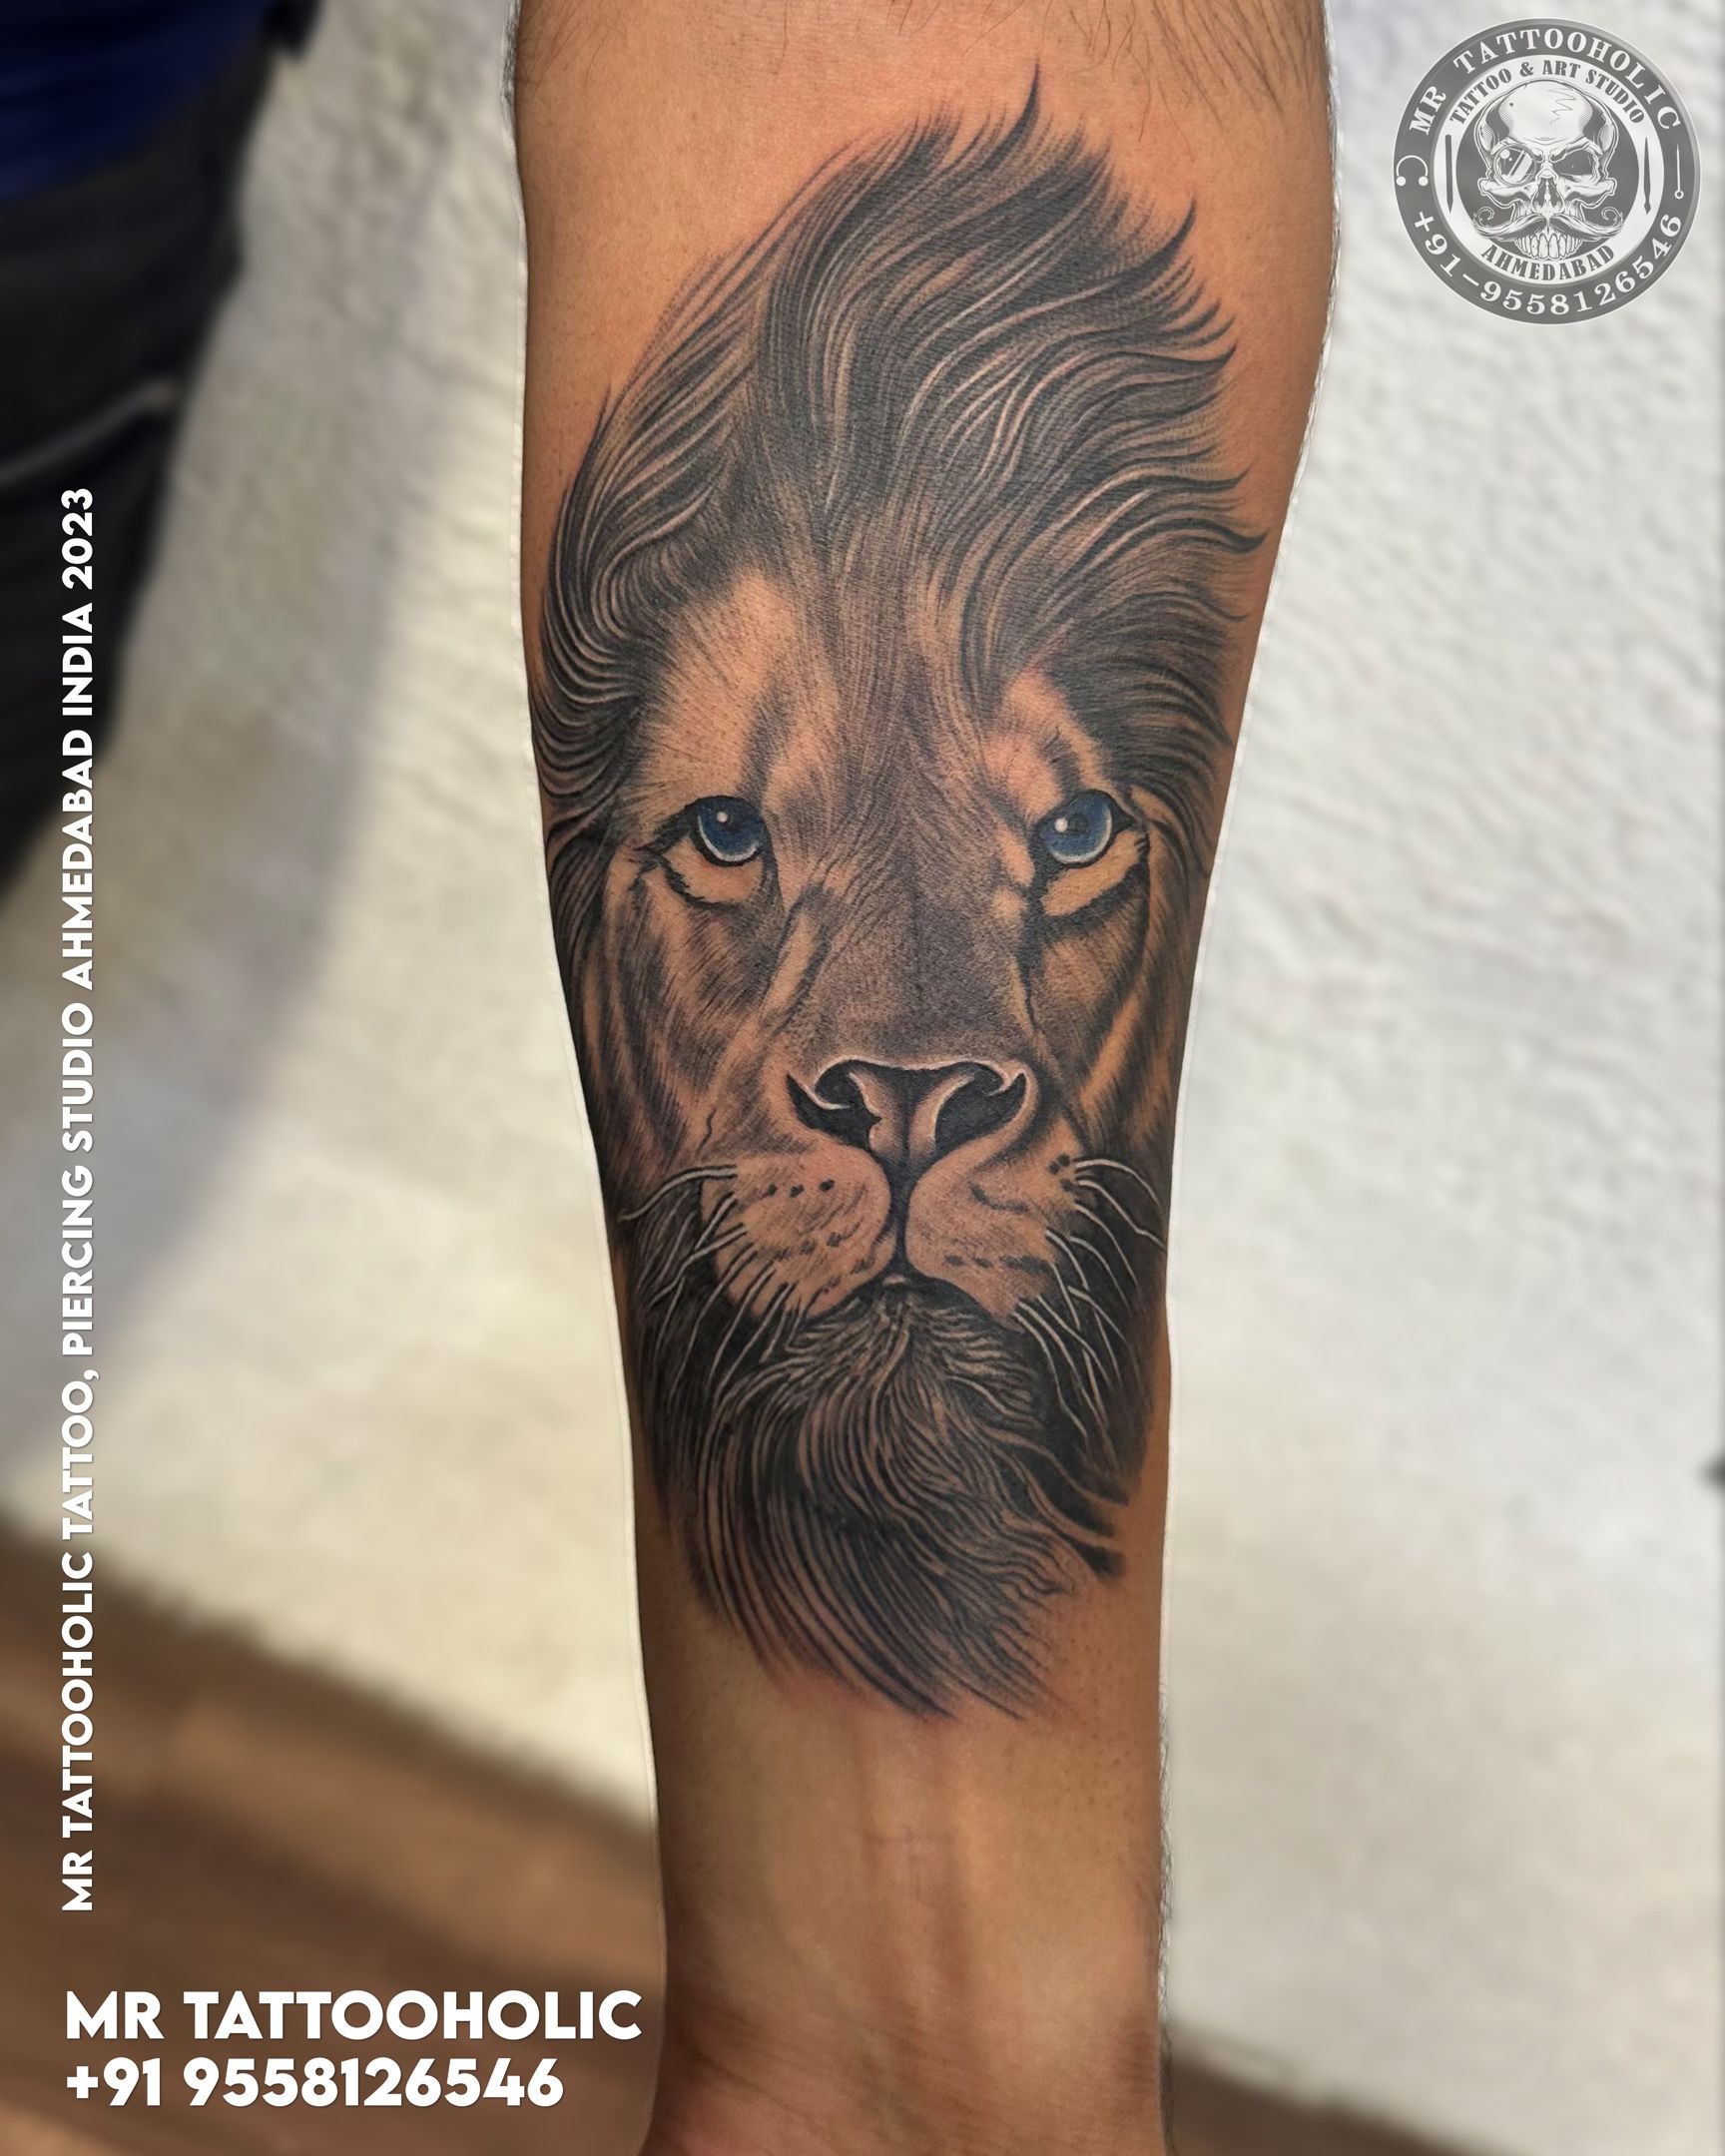 Lion Tattoo Meaning  Lion Tattoo Ideas for Men and Women with Photos  Lion  tattoo sleeves Animal sleeve tattoo Lion head tattoos